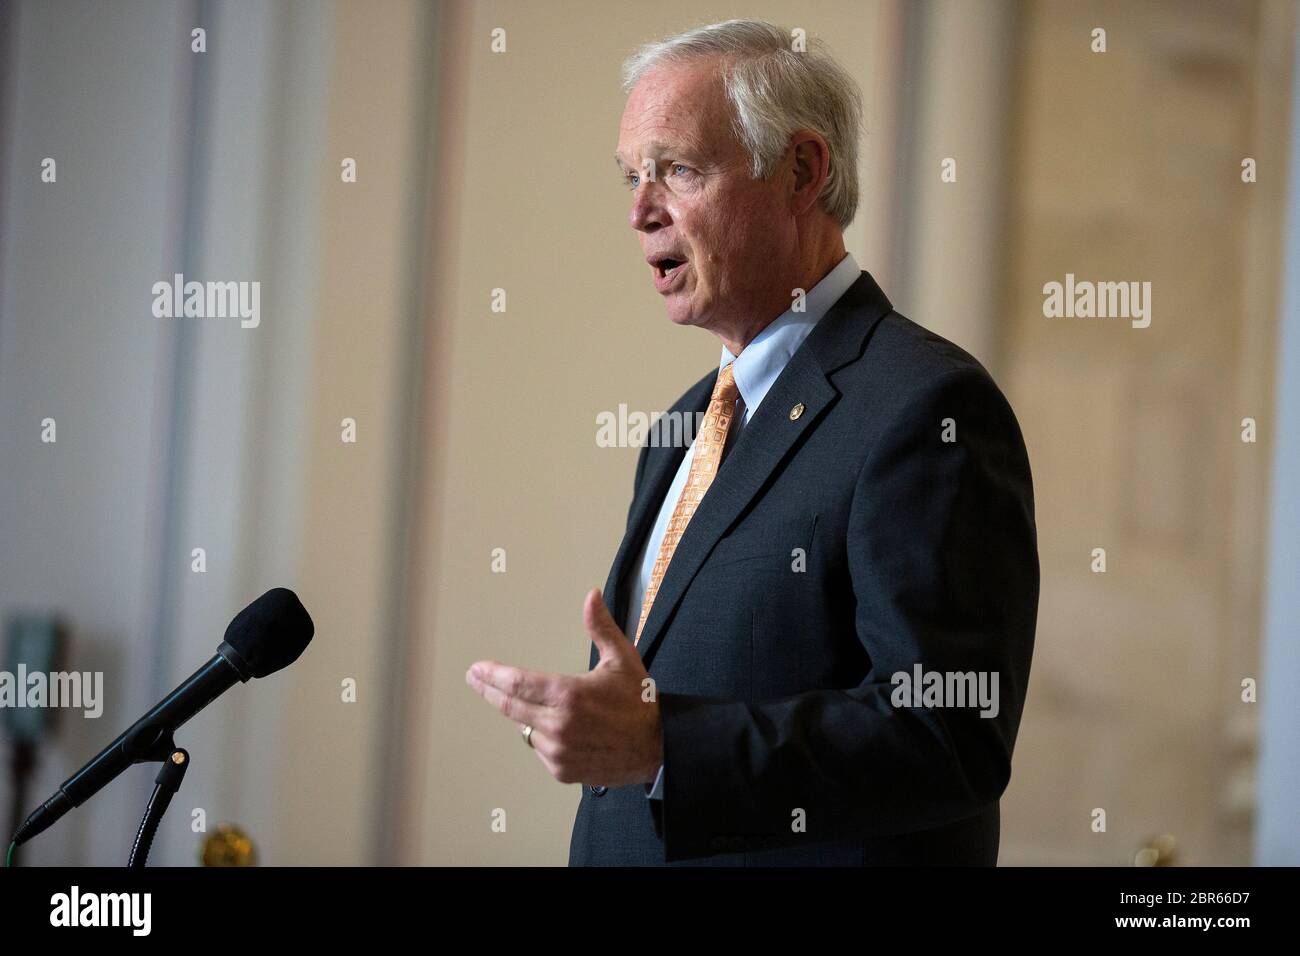 United States Senator Ron Johnson (Republican of Wisconsin) speaks to members of the media prior to a U.S. Senate Committee on Homeland Security and Governmental Affairs meeting in the Senate Russell Office Building in Washington, DC, U.S., on Wednesday, May 20, 2020, as the committee considers a motion to issue a subpoena to Blue Star Strategies. Credit: Stefani Reynolds/CNP | usage worldwide Stock Photo